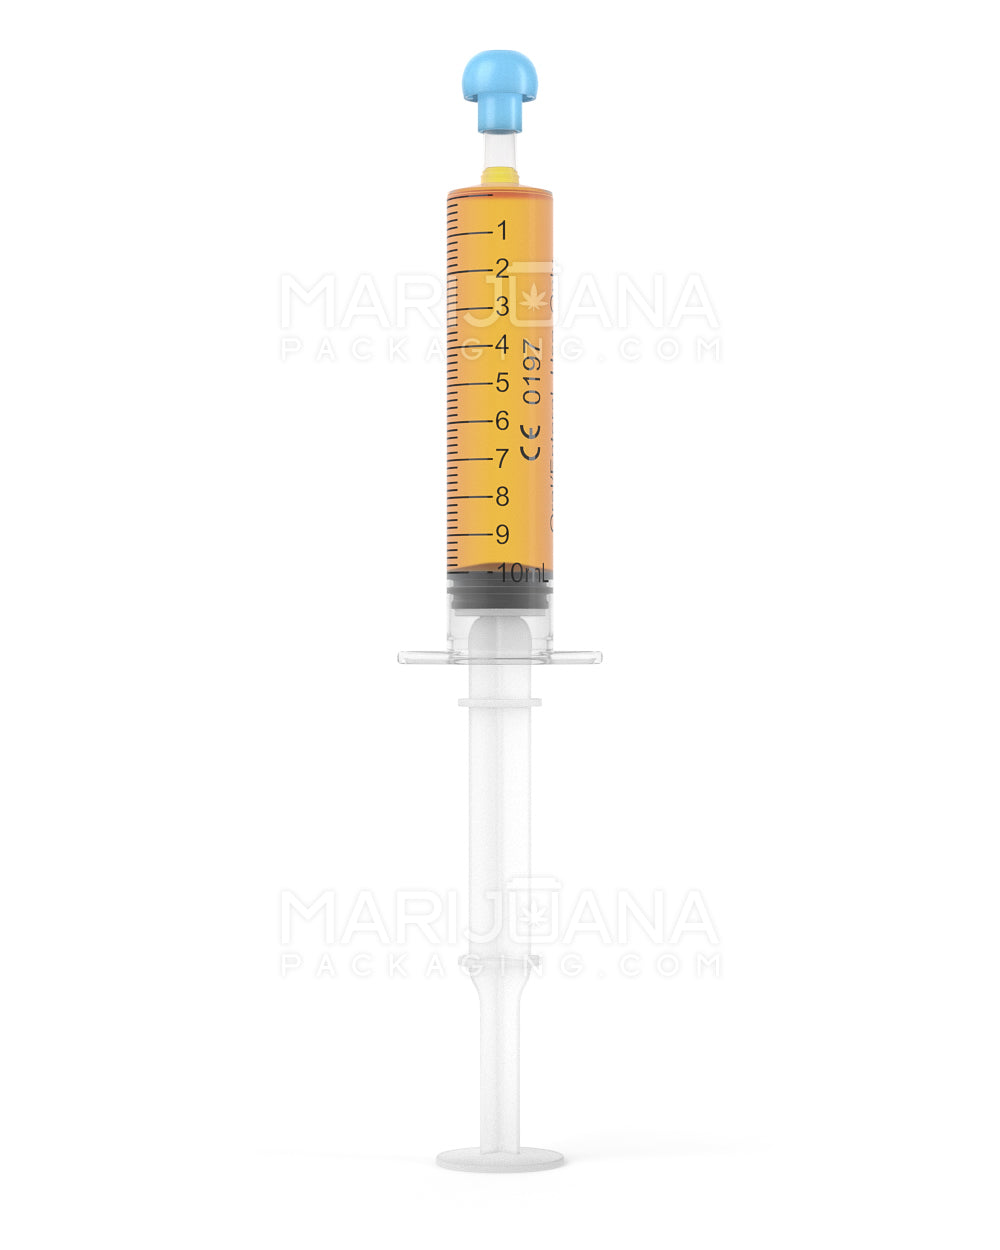 Plastic Oral Concentrate Syringes | 10mL - 1mL Increments - 100 Count - 2